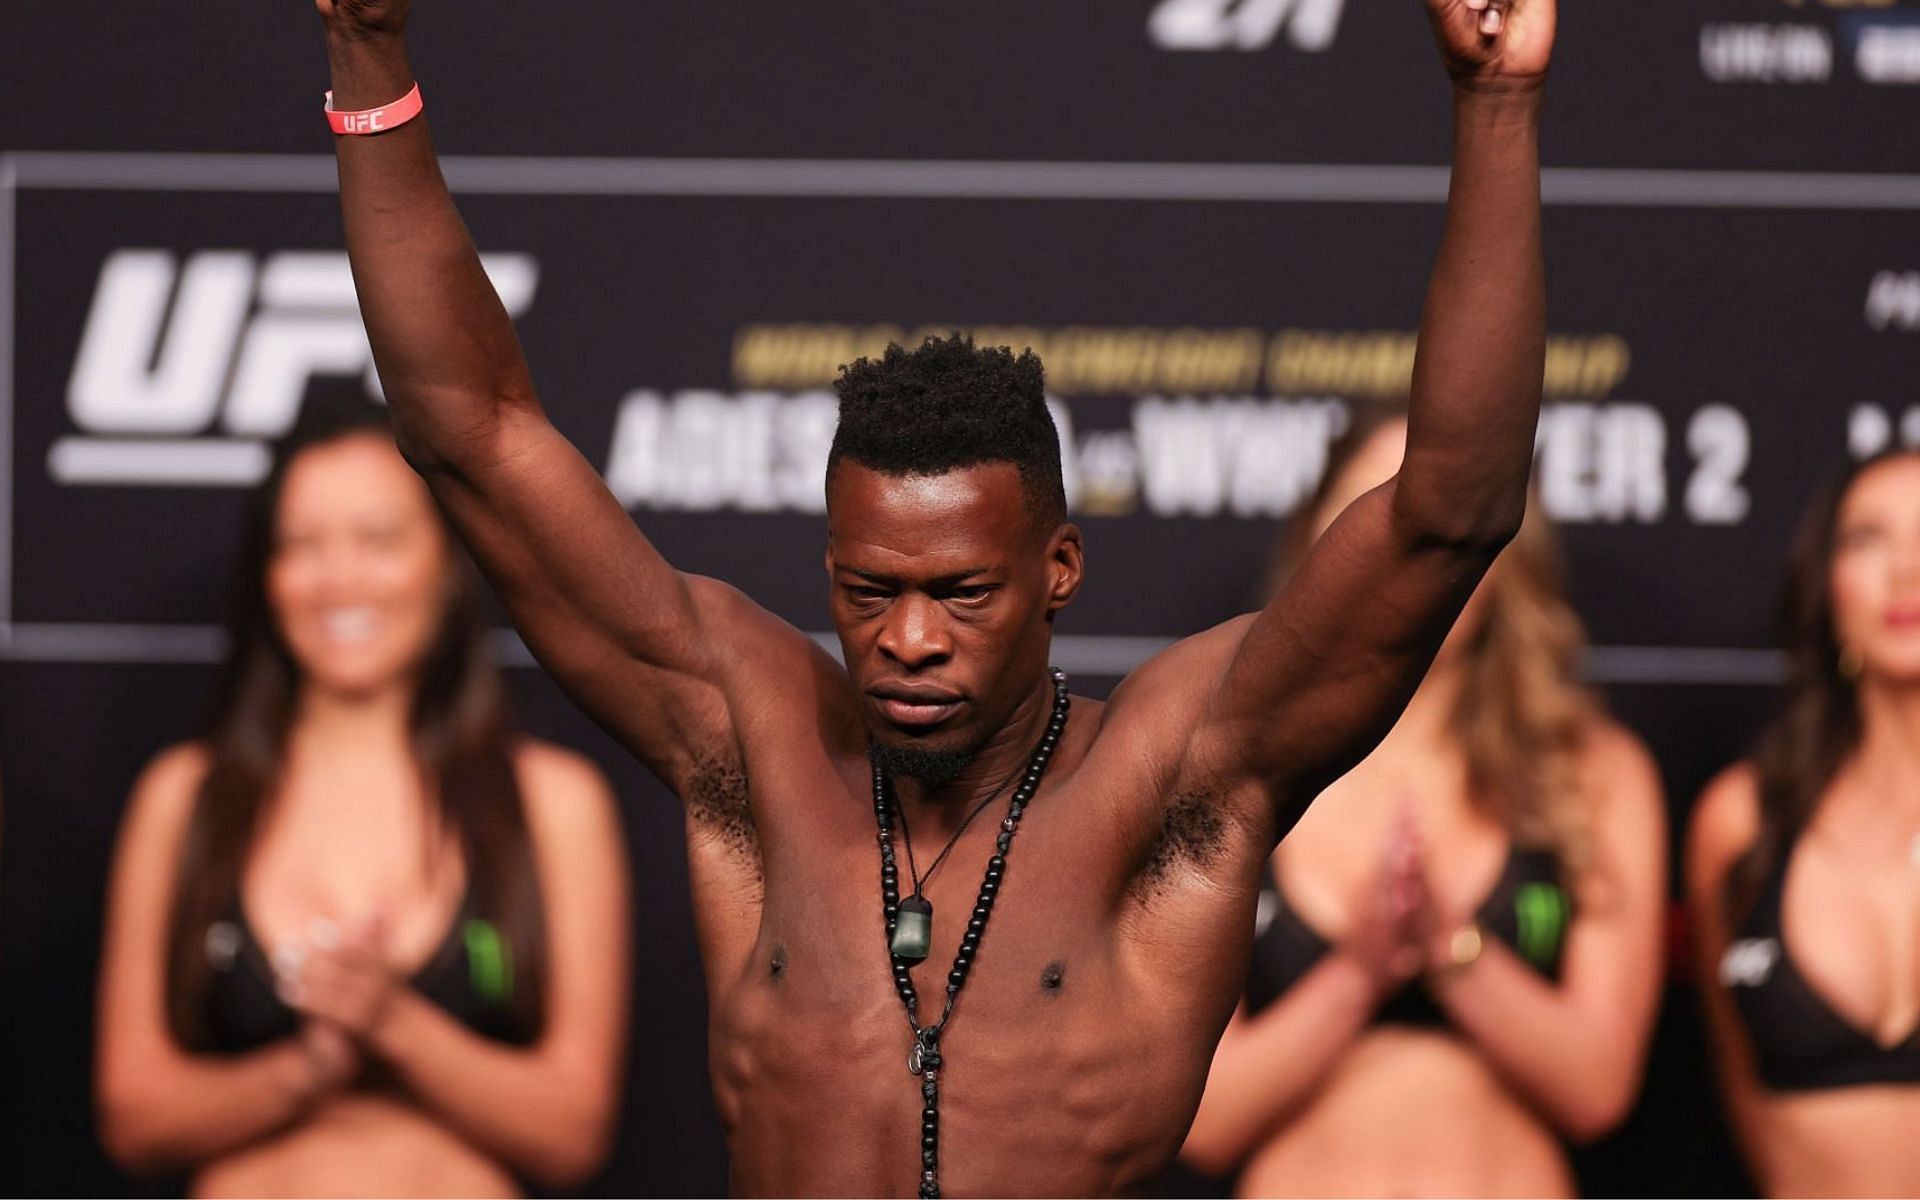 “Very, very, very disappointed” – Israel Adesanya’s coach on ‘Blood Diamond’ Mike Mathetha’s UFC debut